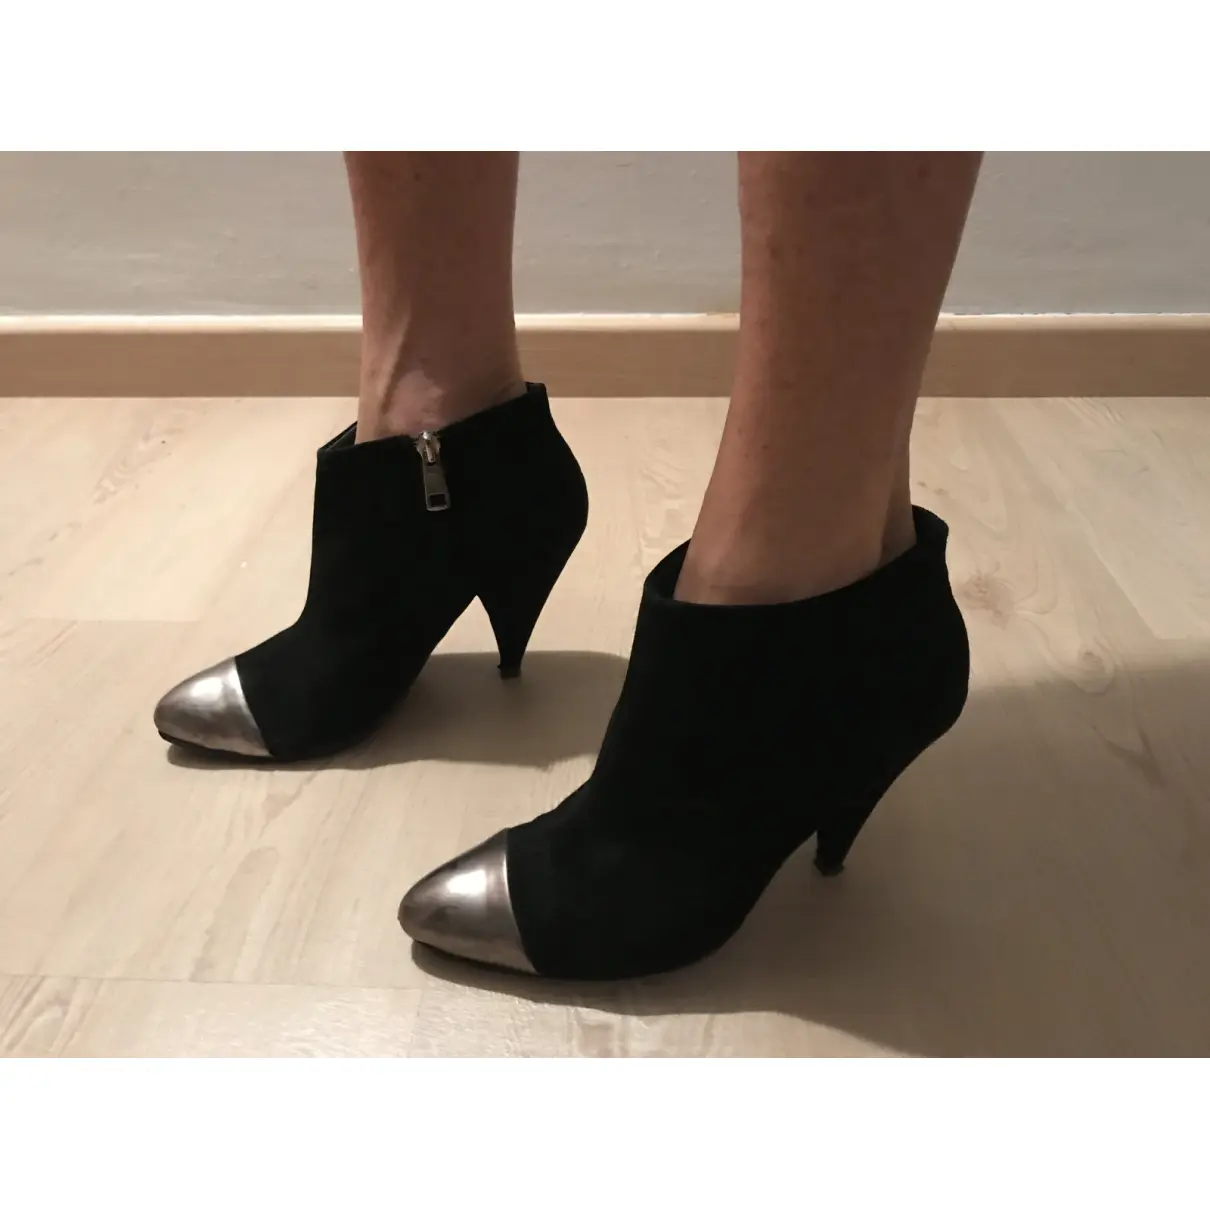 Ankle boots Bimba y Lola